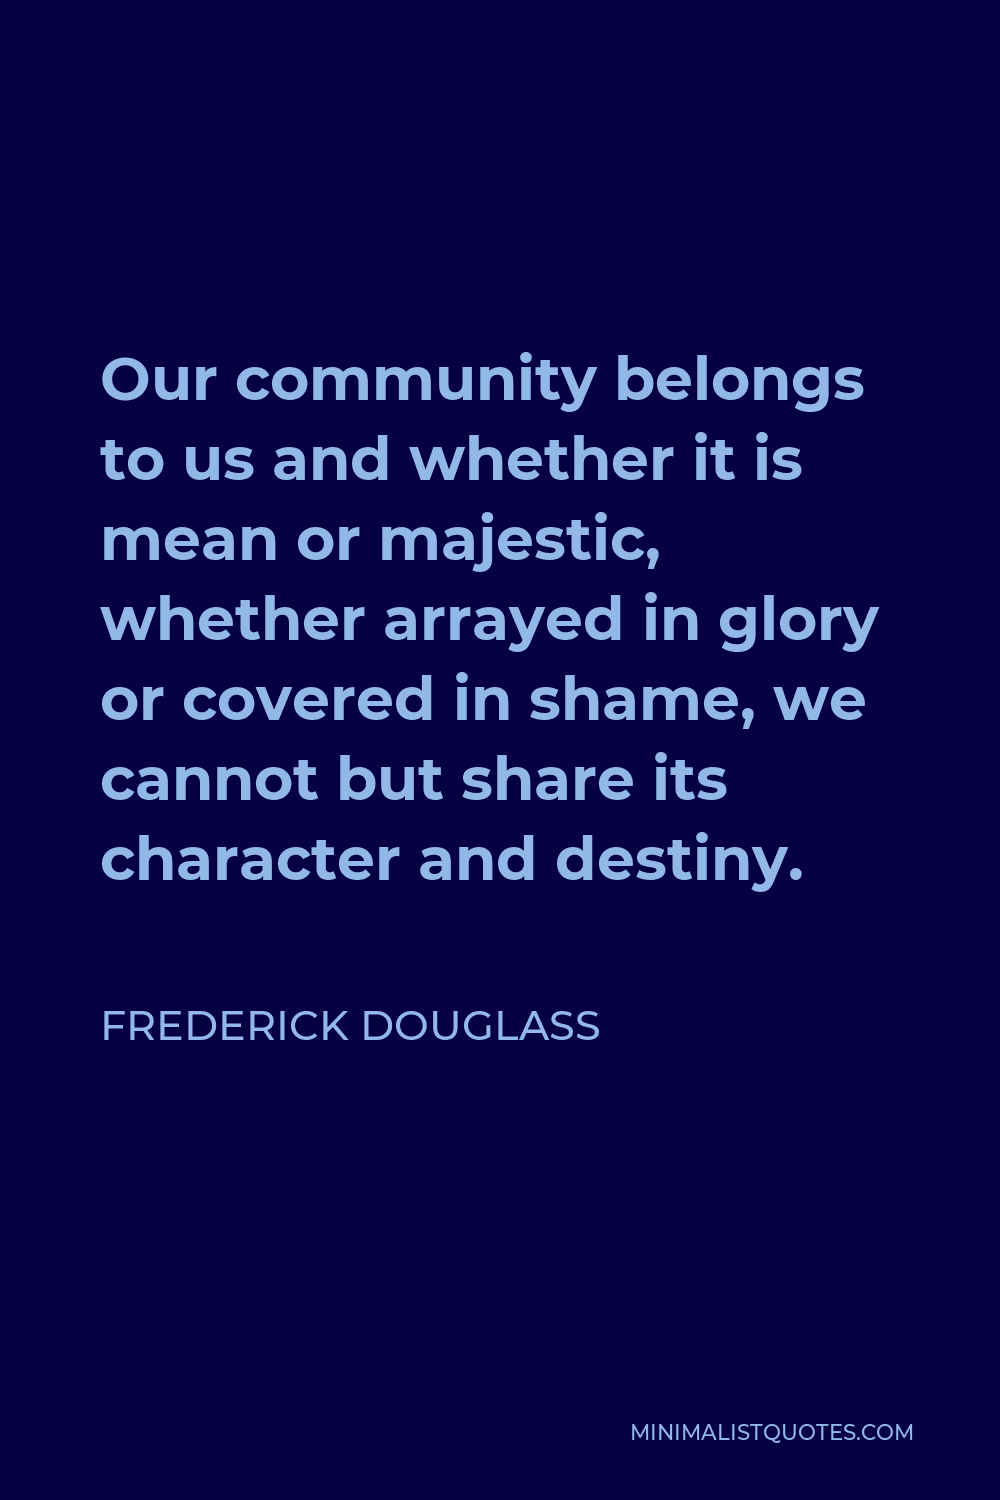 Frederick Douglass Quote: Our Community Belongs To Us And Whether It Is Mean  Or Majestic, Whether Arrayed In Glory Or Covered In Shame, We Cannot But  Share Its Character And Destiny.